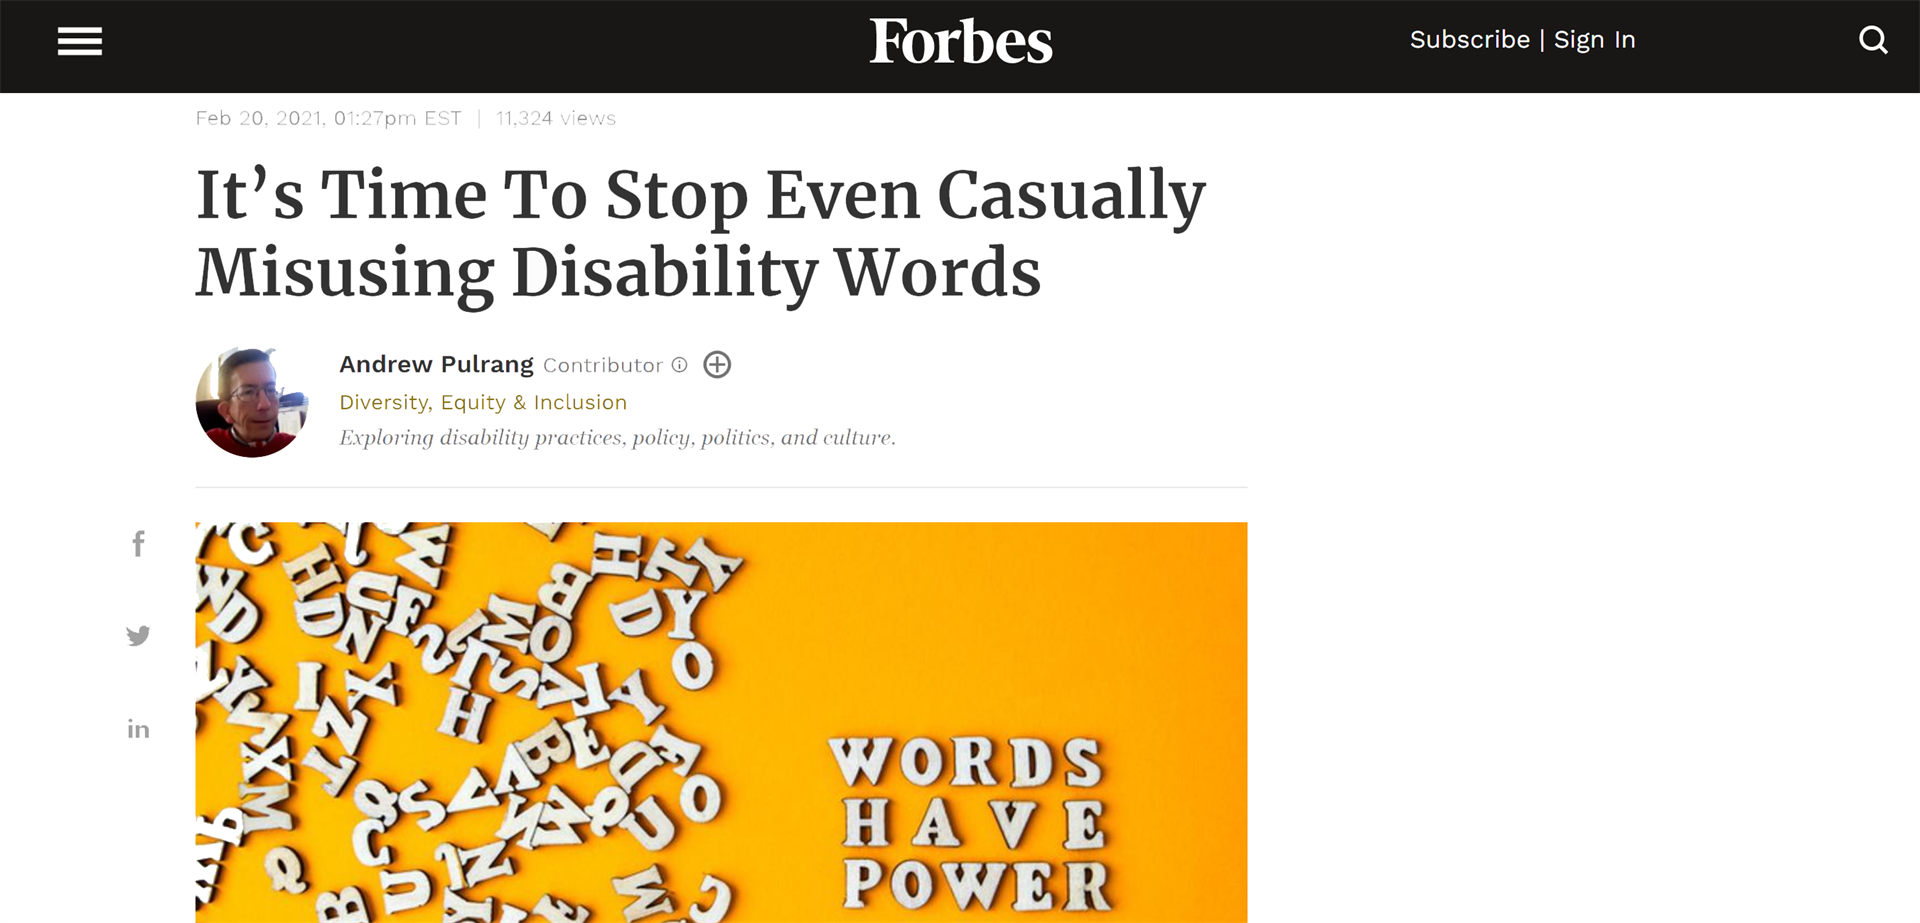 Screen Capture: It's Time To Stop Even Casually Misusing Disability Words